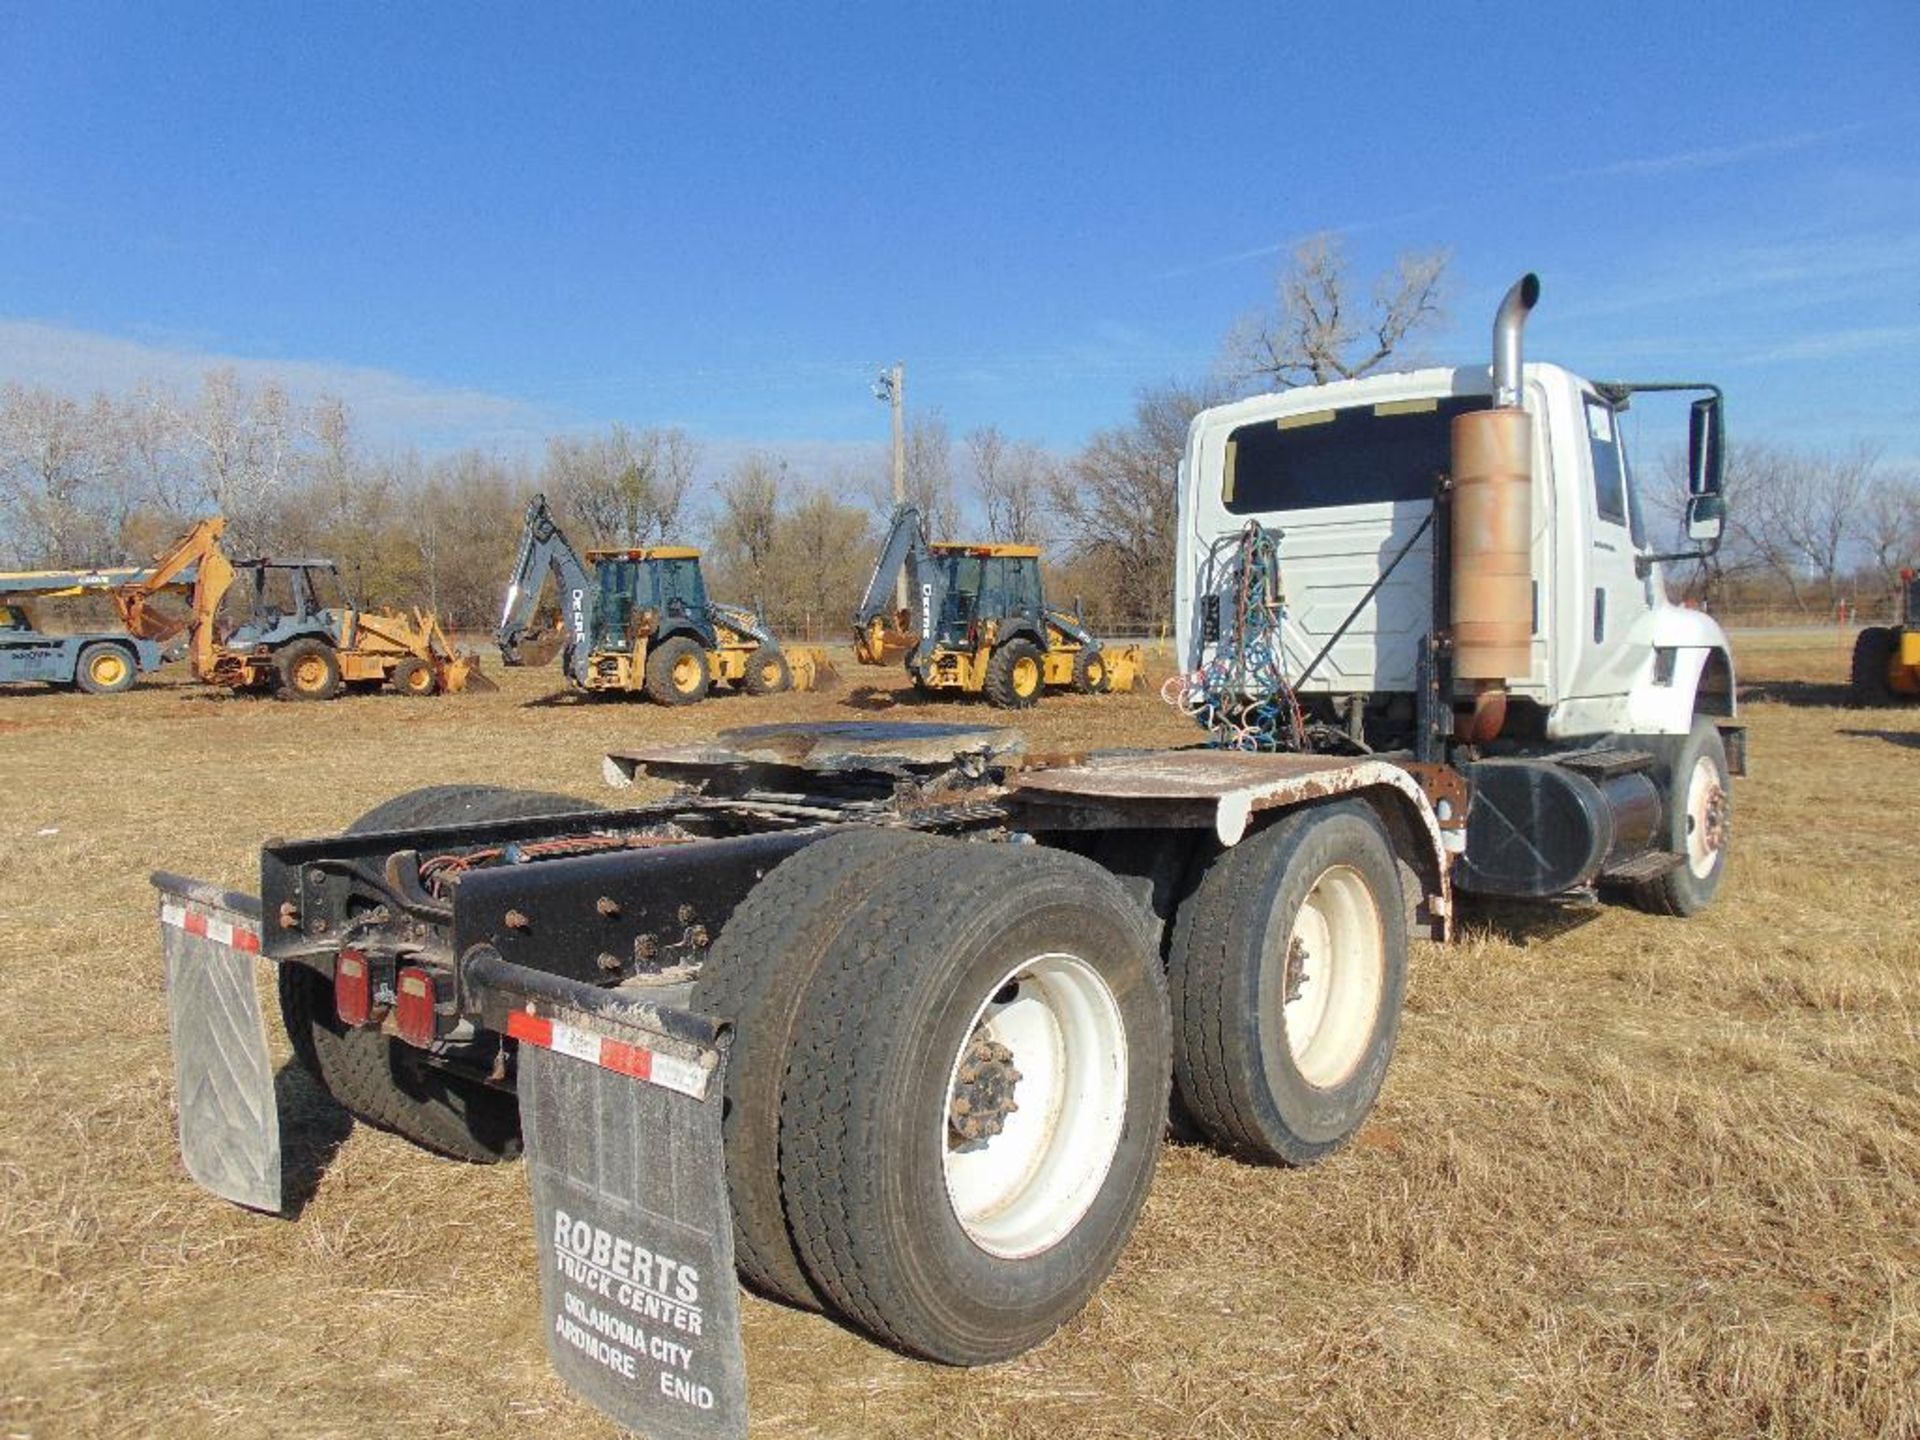 2005 IHC 7600 T/A Truck Tractor, s/n 1hswysbr065235647, cat c 13 eng, 10 spd trans, od reads 209294 - Image 8 of 10